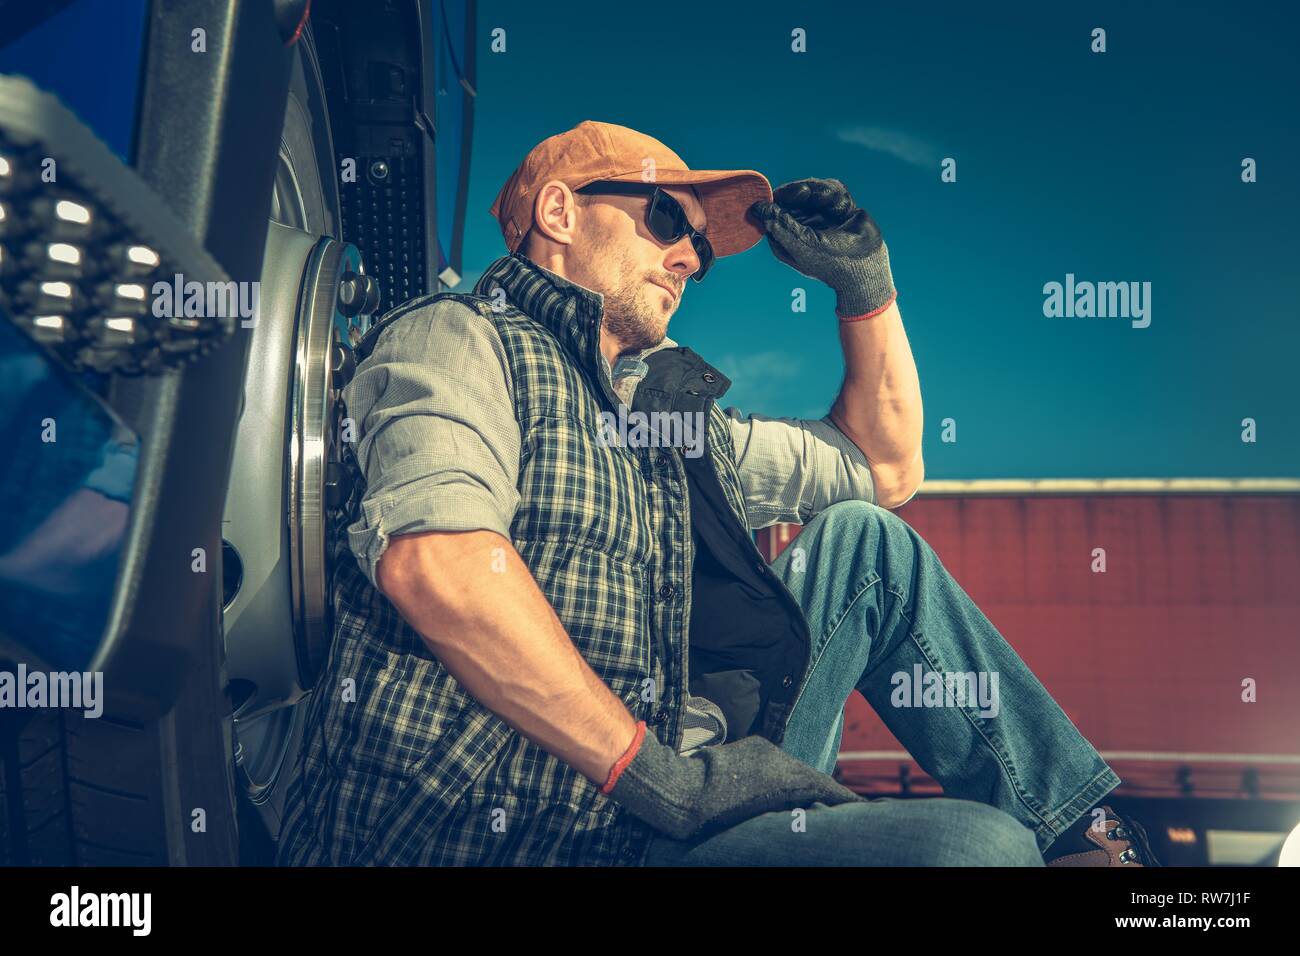 https://c8.alamy.com/comp/RW7J1F/semi-truck-driver-break-heavy-load-transportation-industry-caucasian-trucker-supporting-his-back-on-a-truck-wheel-while-seating-on-the-pavement-RW7J1F.jpg